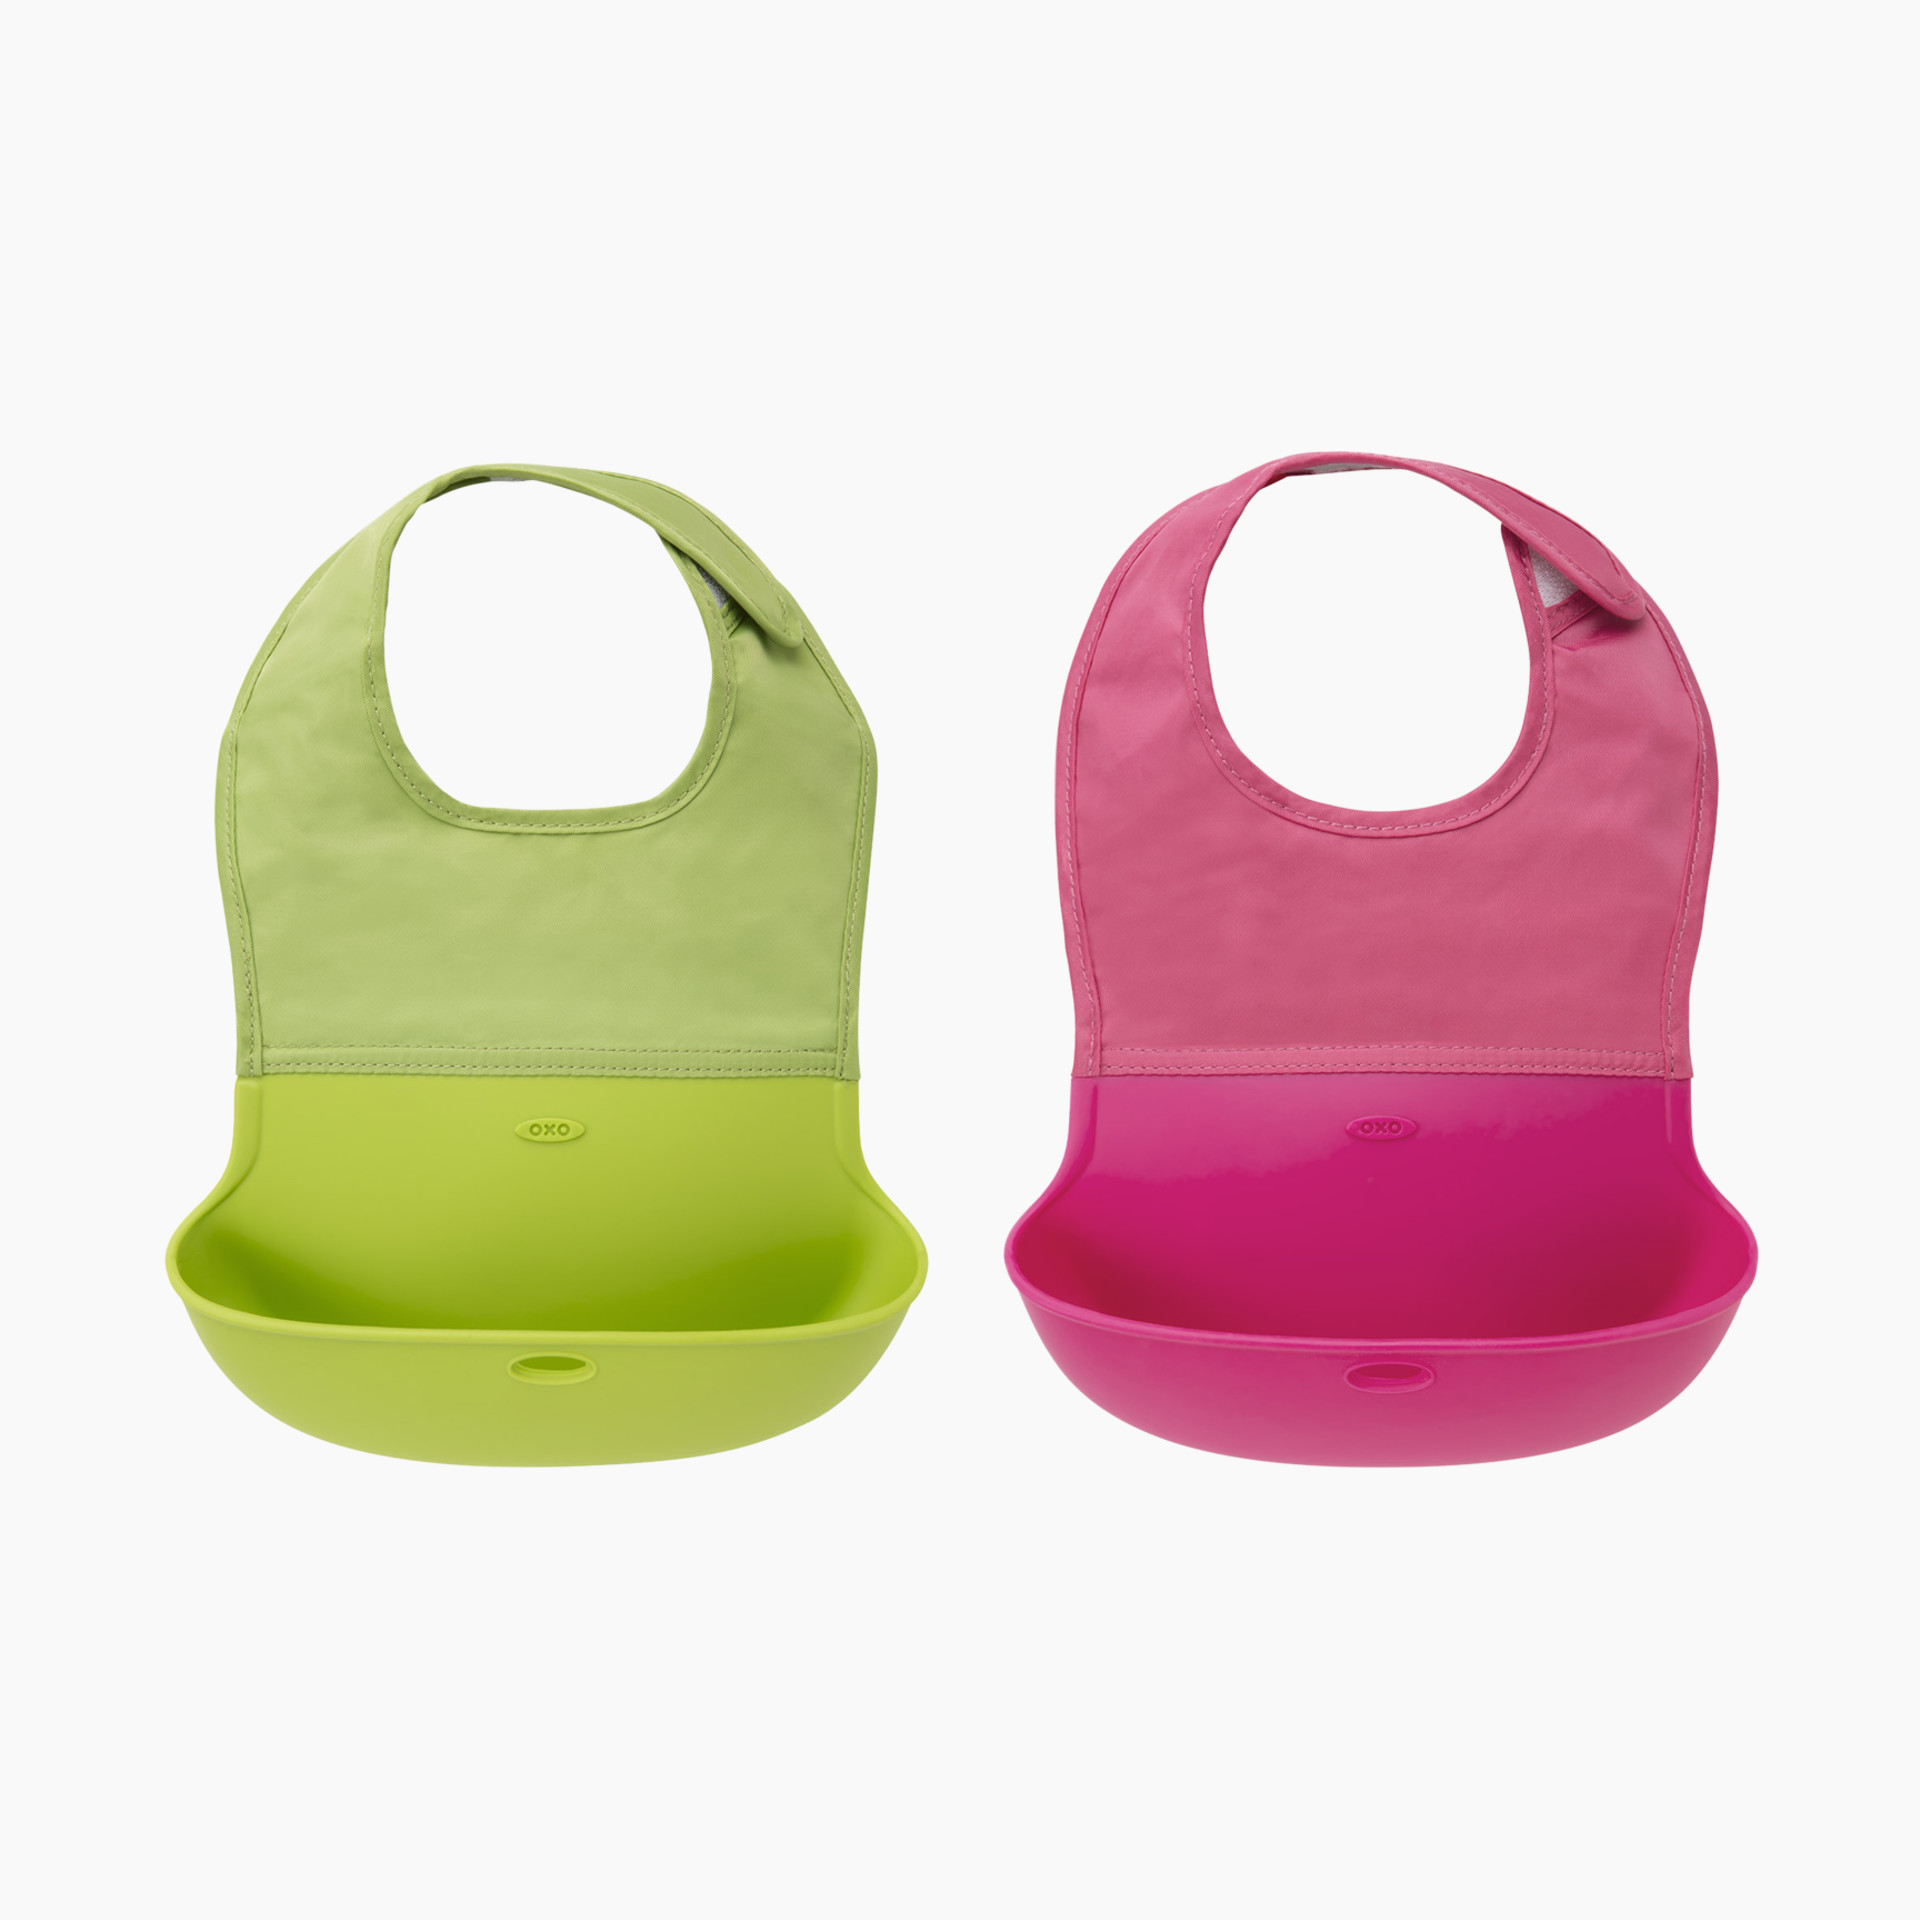  OXO Tot Silicone Self-Feeder 2 Pack Teal/Pink : Baby